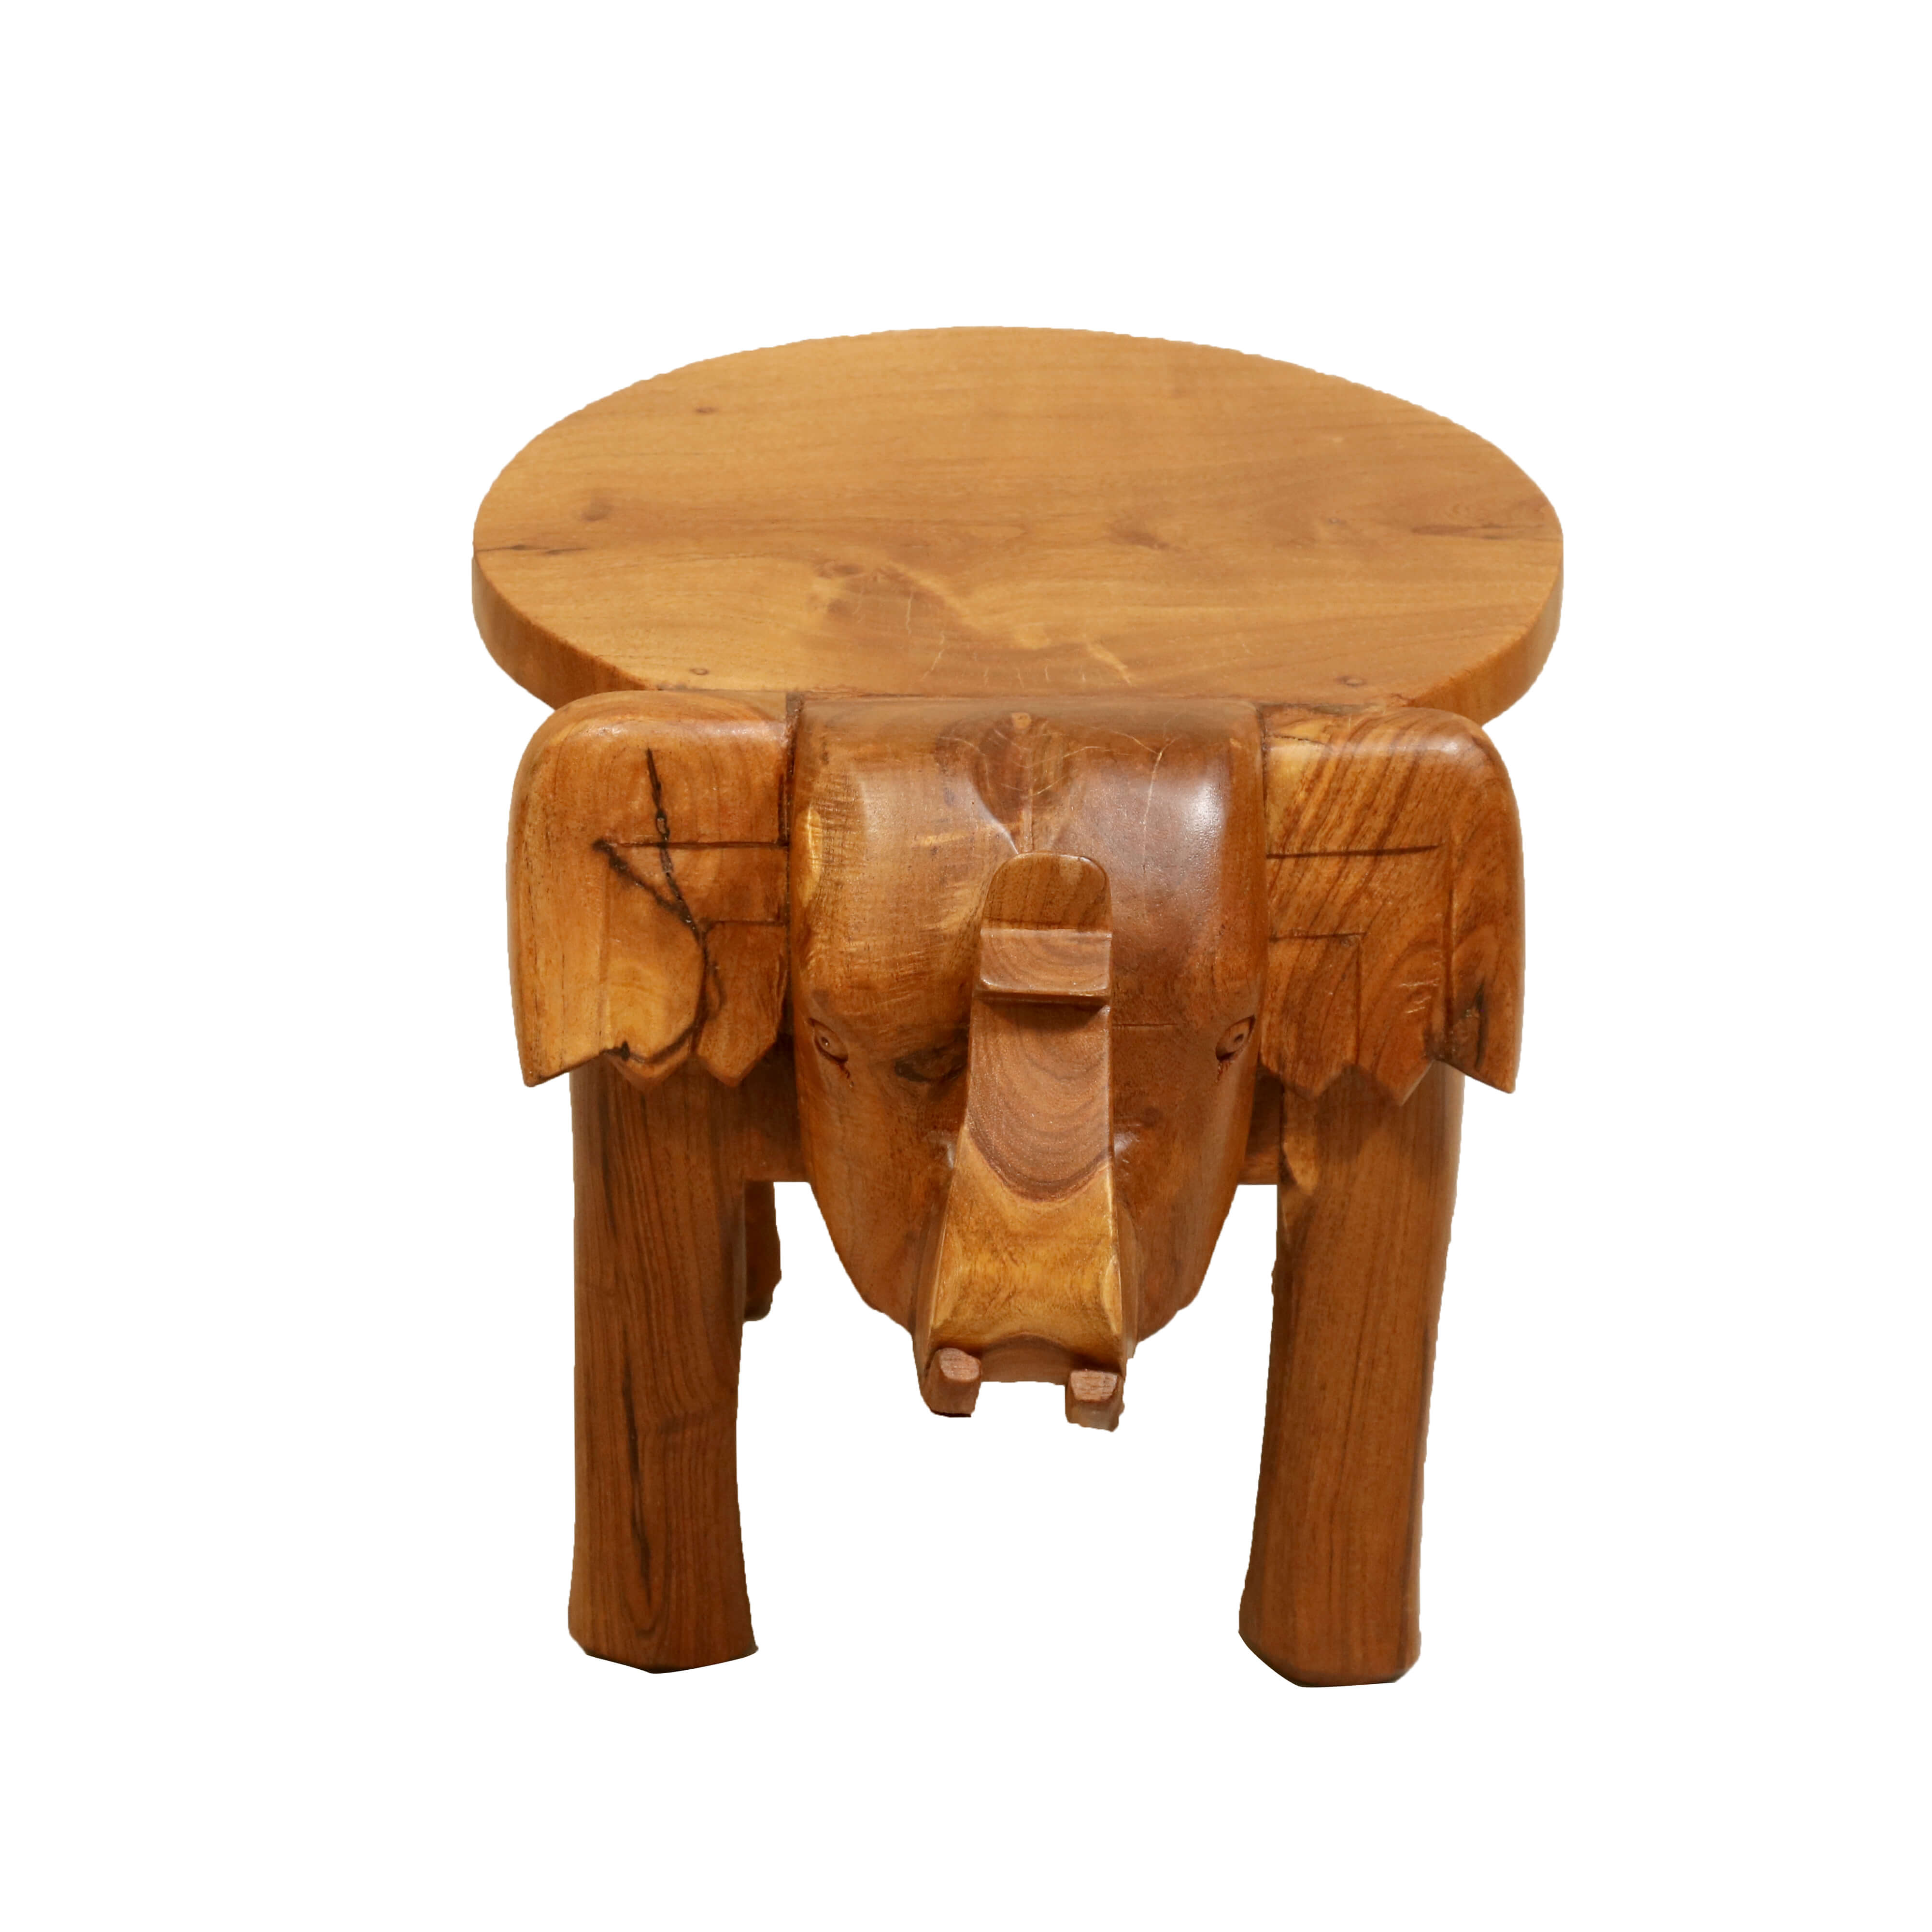 Wooden Tone Elephant Table Stand Small (8 x 11 x 8 Inch) Animal Figurine